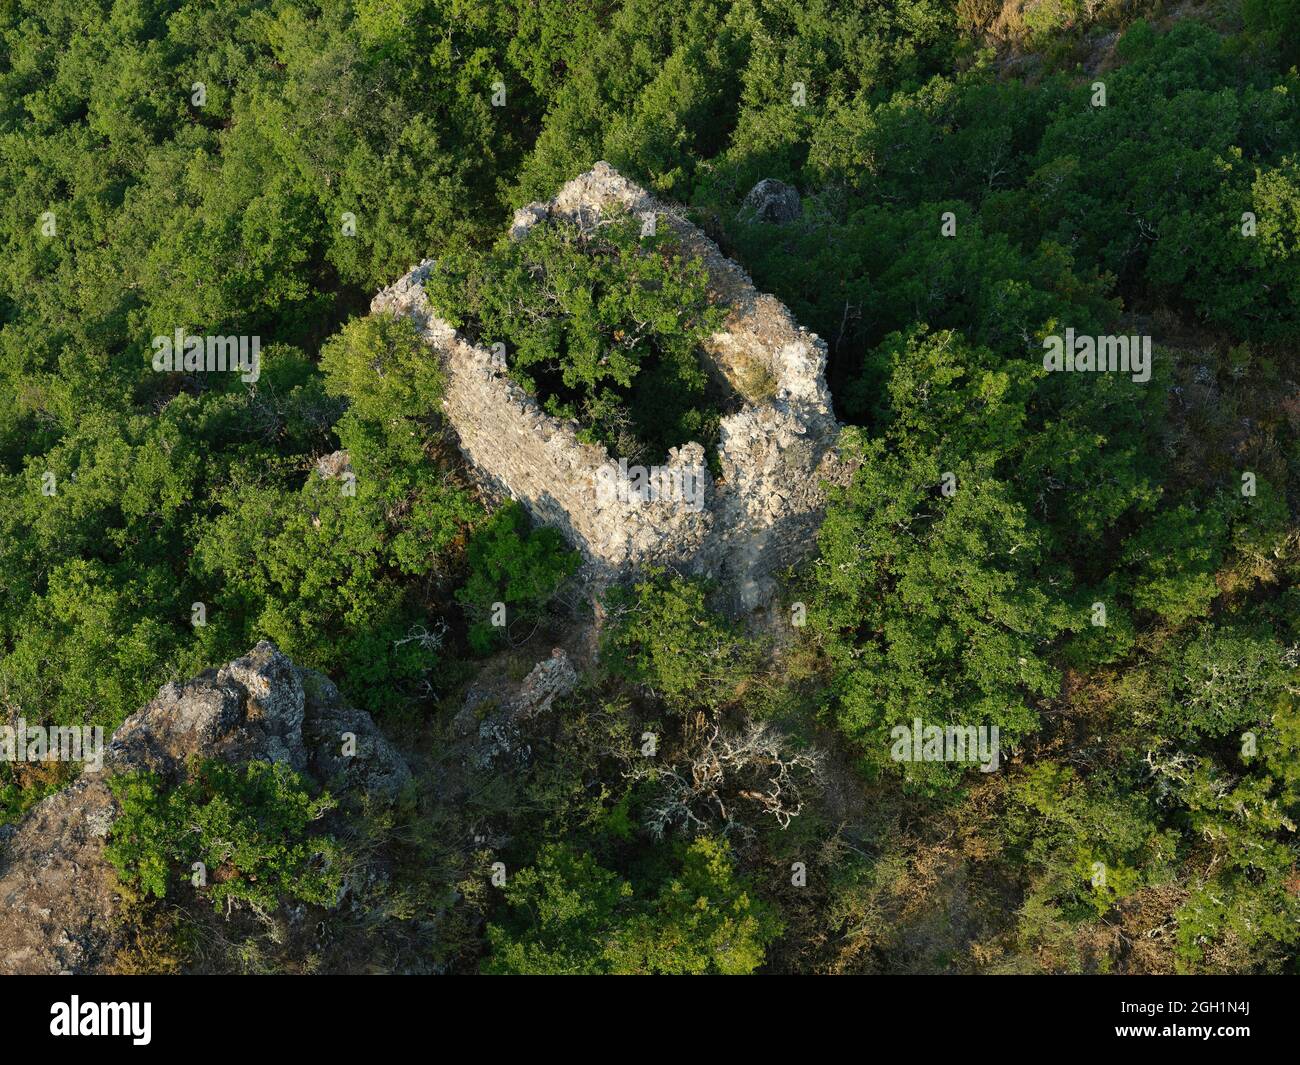 AERIAL VIEW. Abandoned watchtower being overgrown by vegetation. Nibles, Alpes-de-Haute-Provence, France. Stock Photo